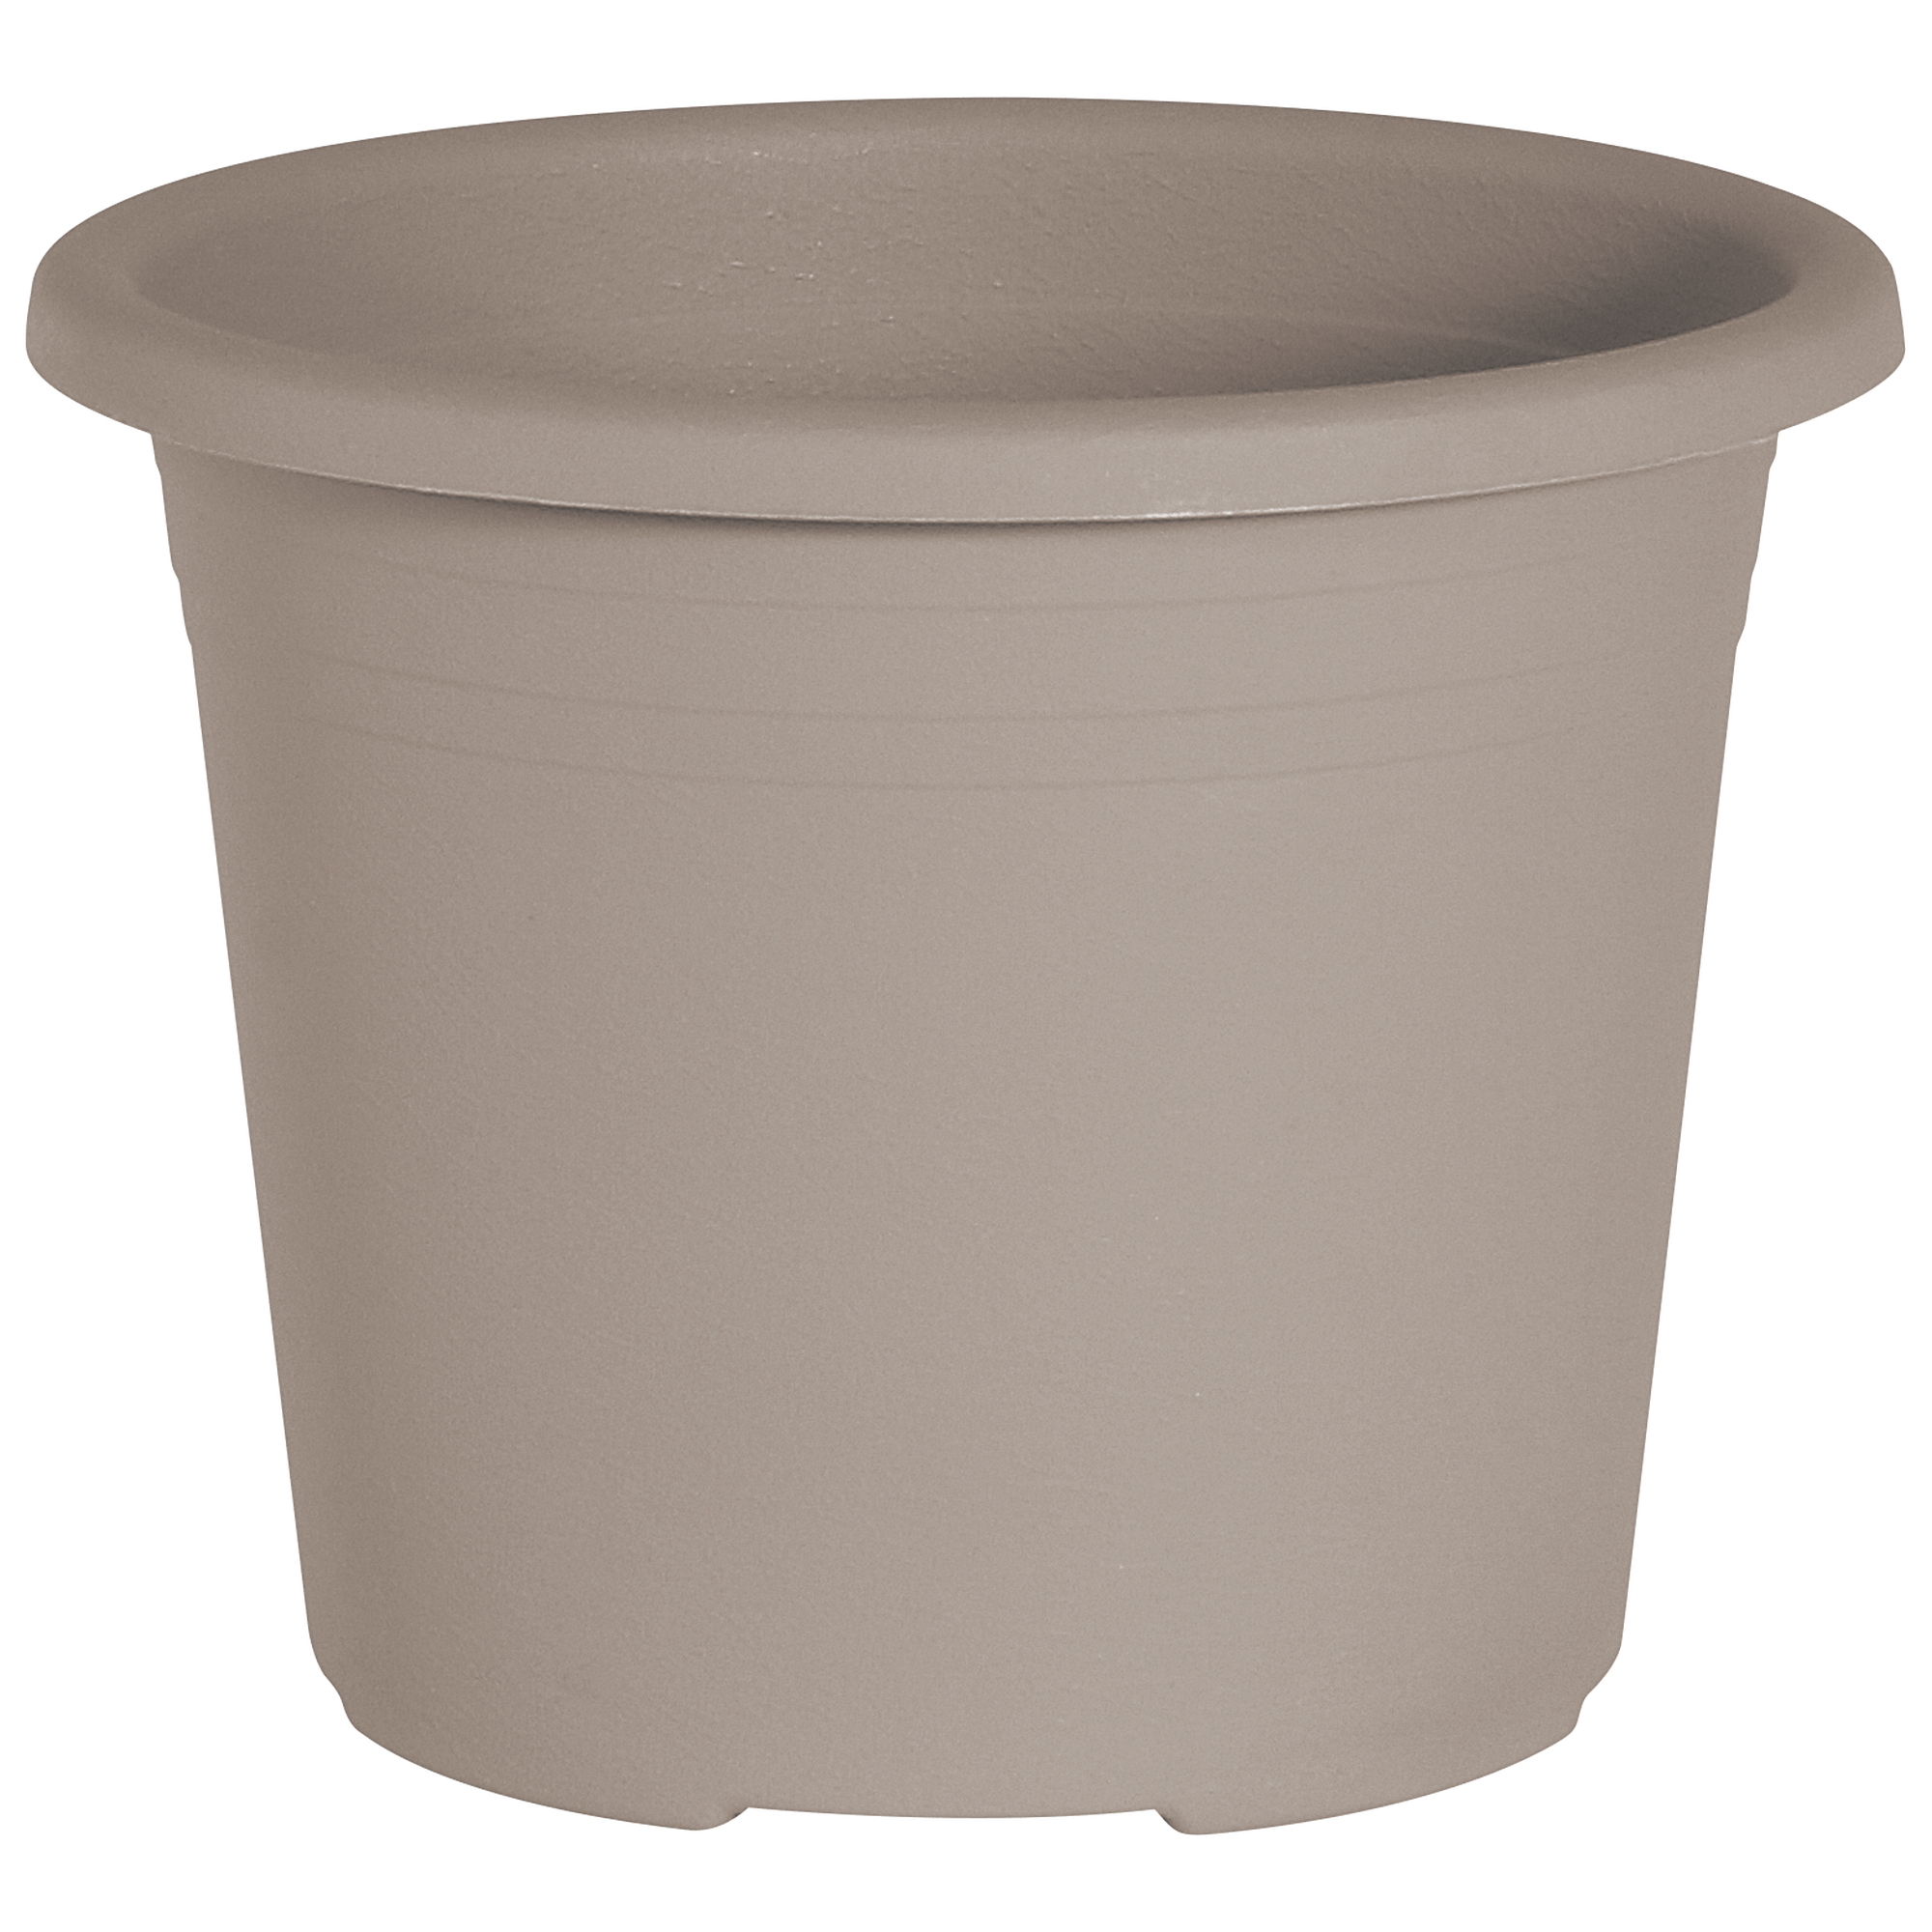 Topf 'Cylindro' taupe Ø 16 cm, 1,4 Liter + product picture